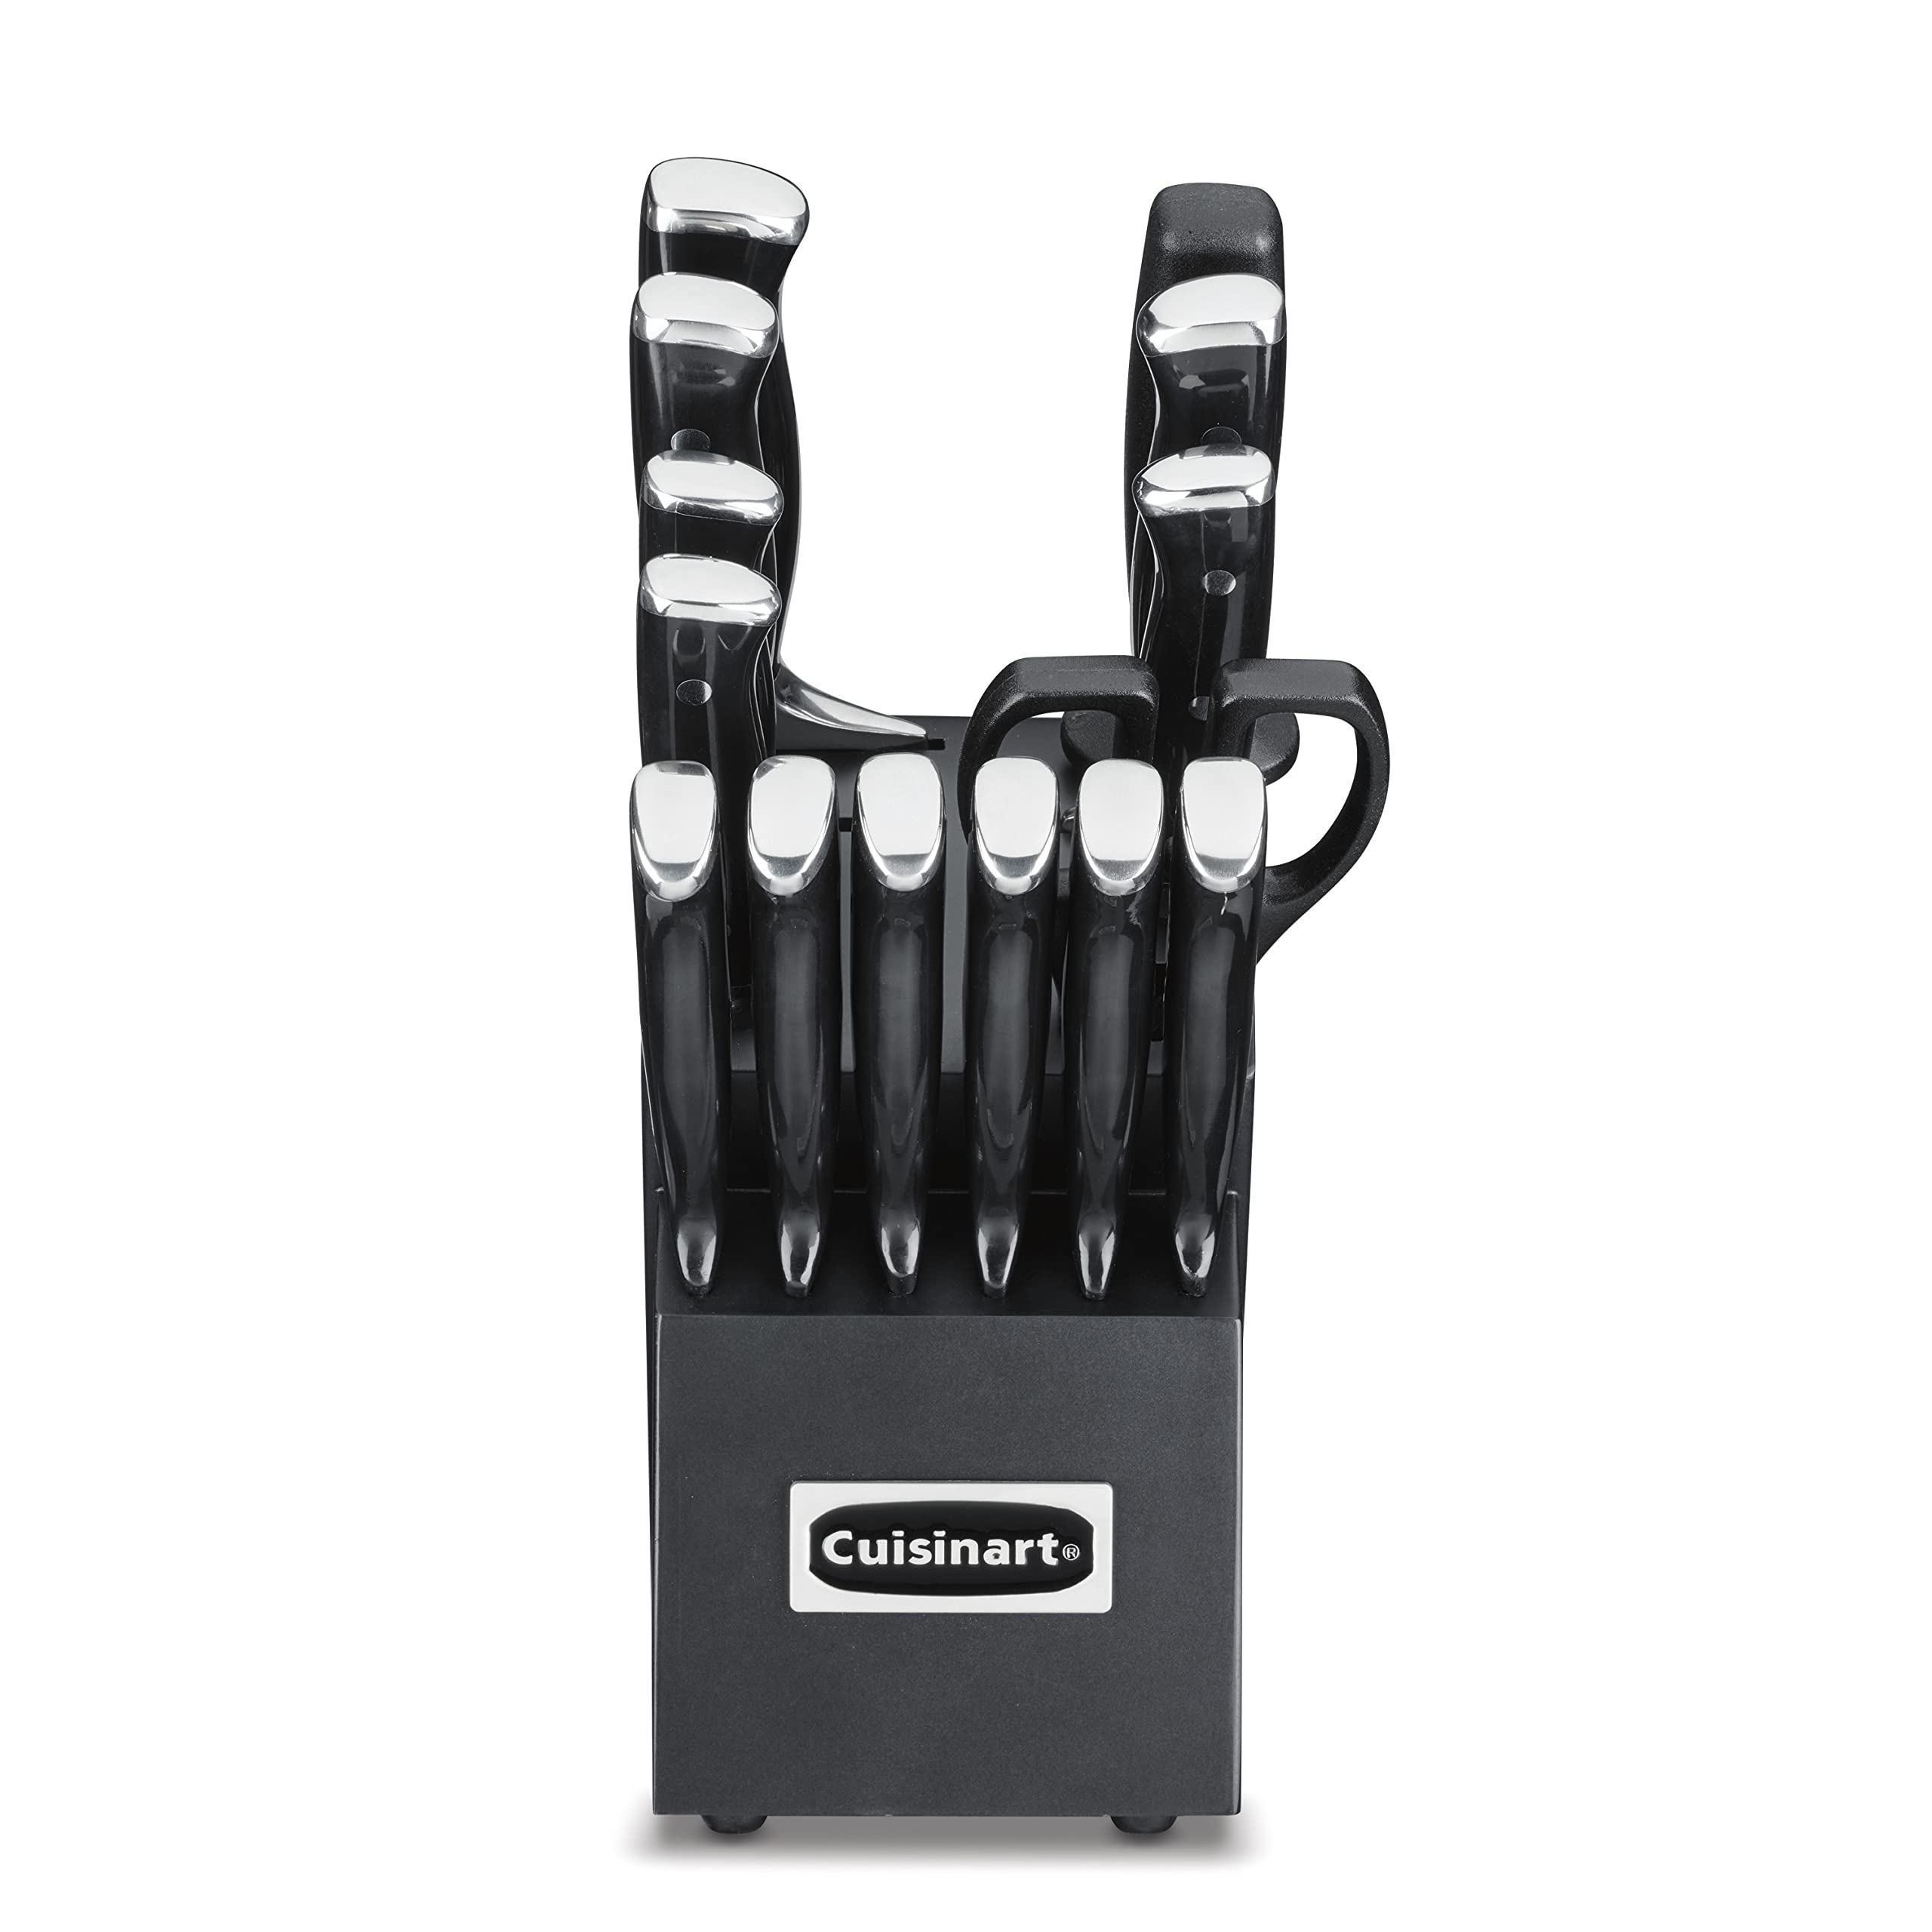 Cuisinart C77BTR-15PBK Classic Forged Triple Rivet, 15-Piece Knife Set with Block, Superior High-Carbon Stainless Steel Blades for Precision and Accuracy, Black